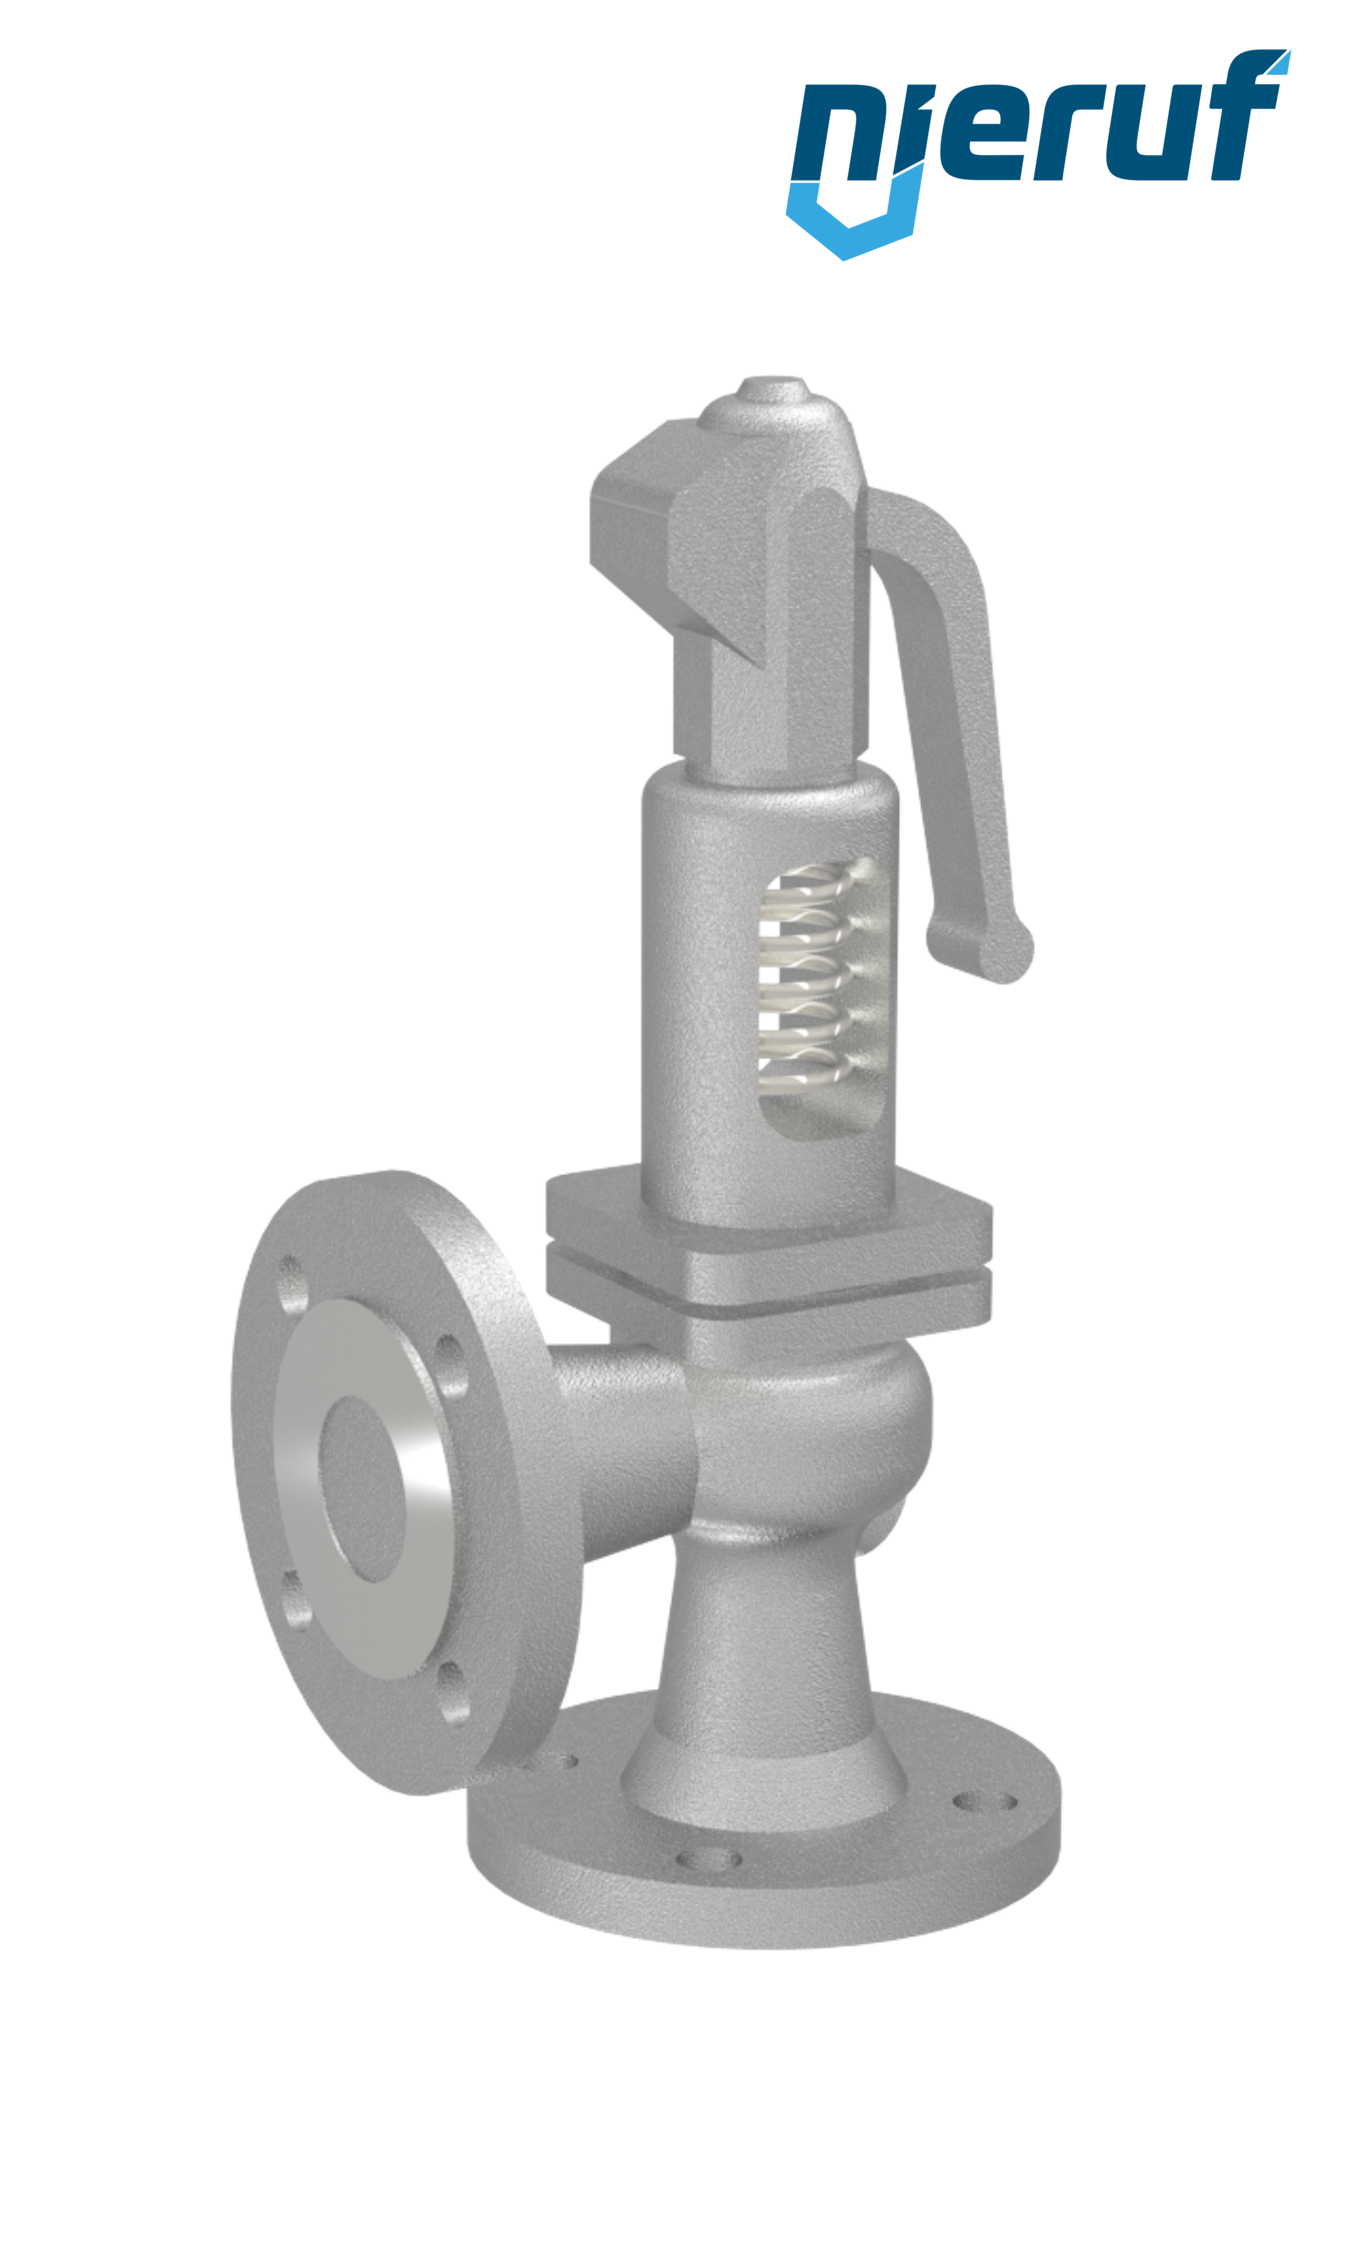 flange-safety valve DN32/DN32 SF0102, cast iron EN-JL1040 metal, with lever